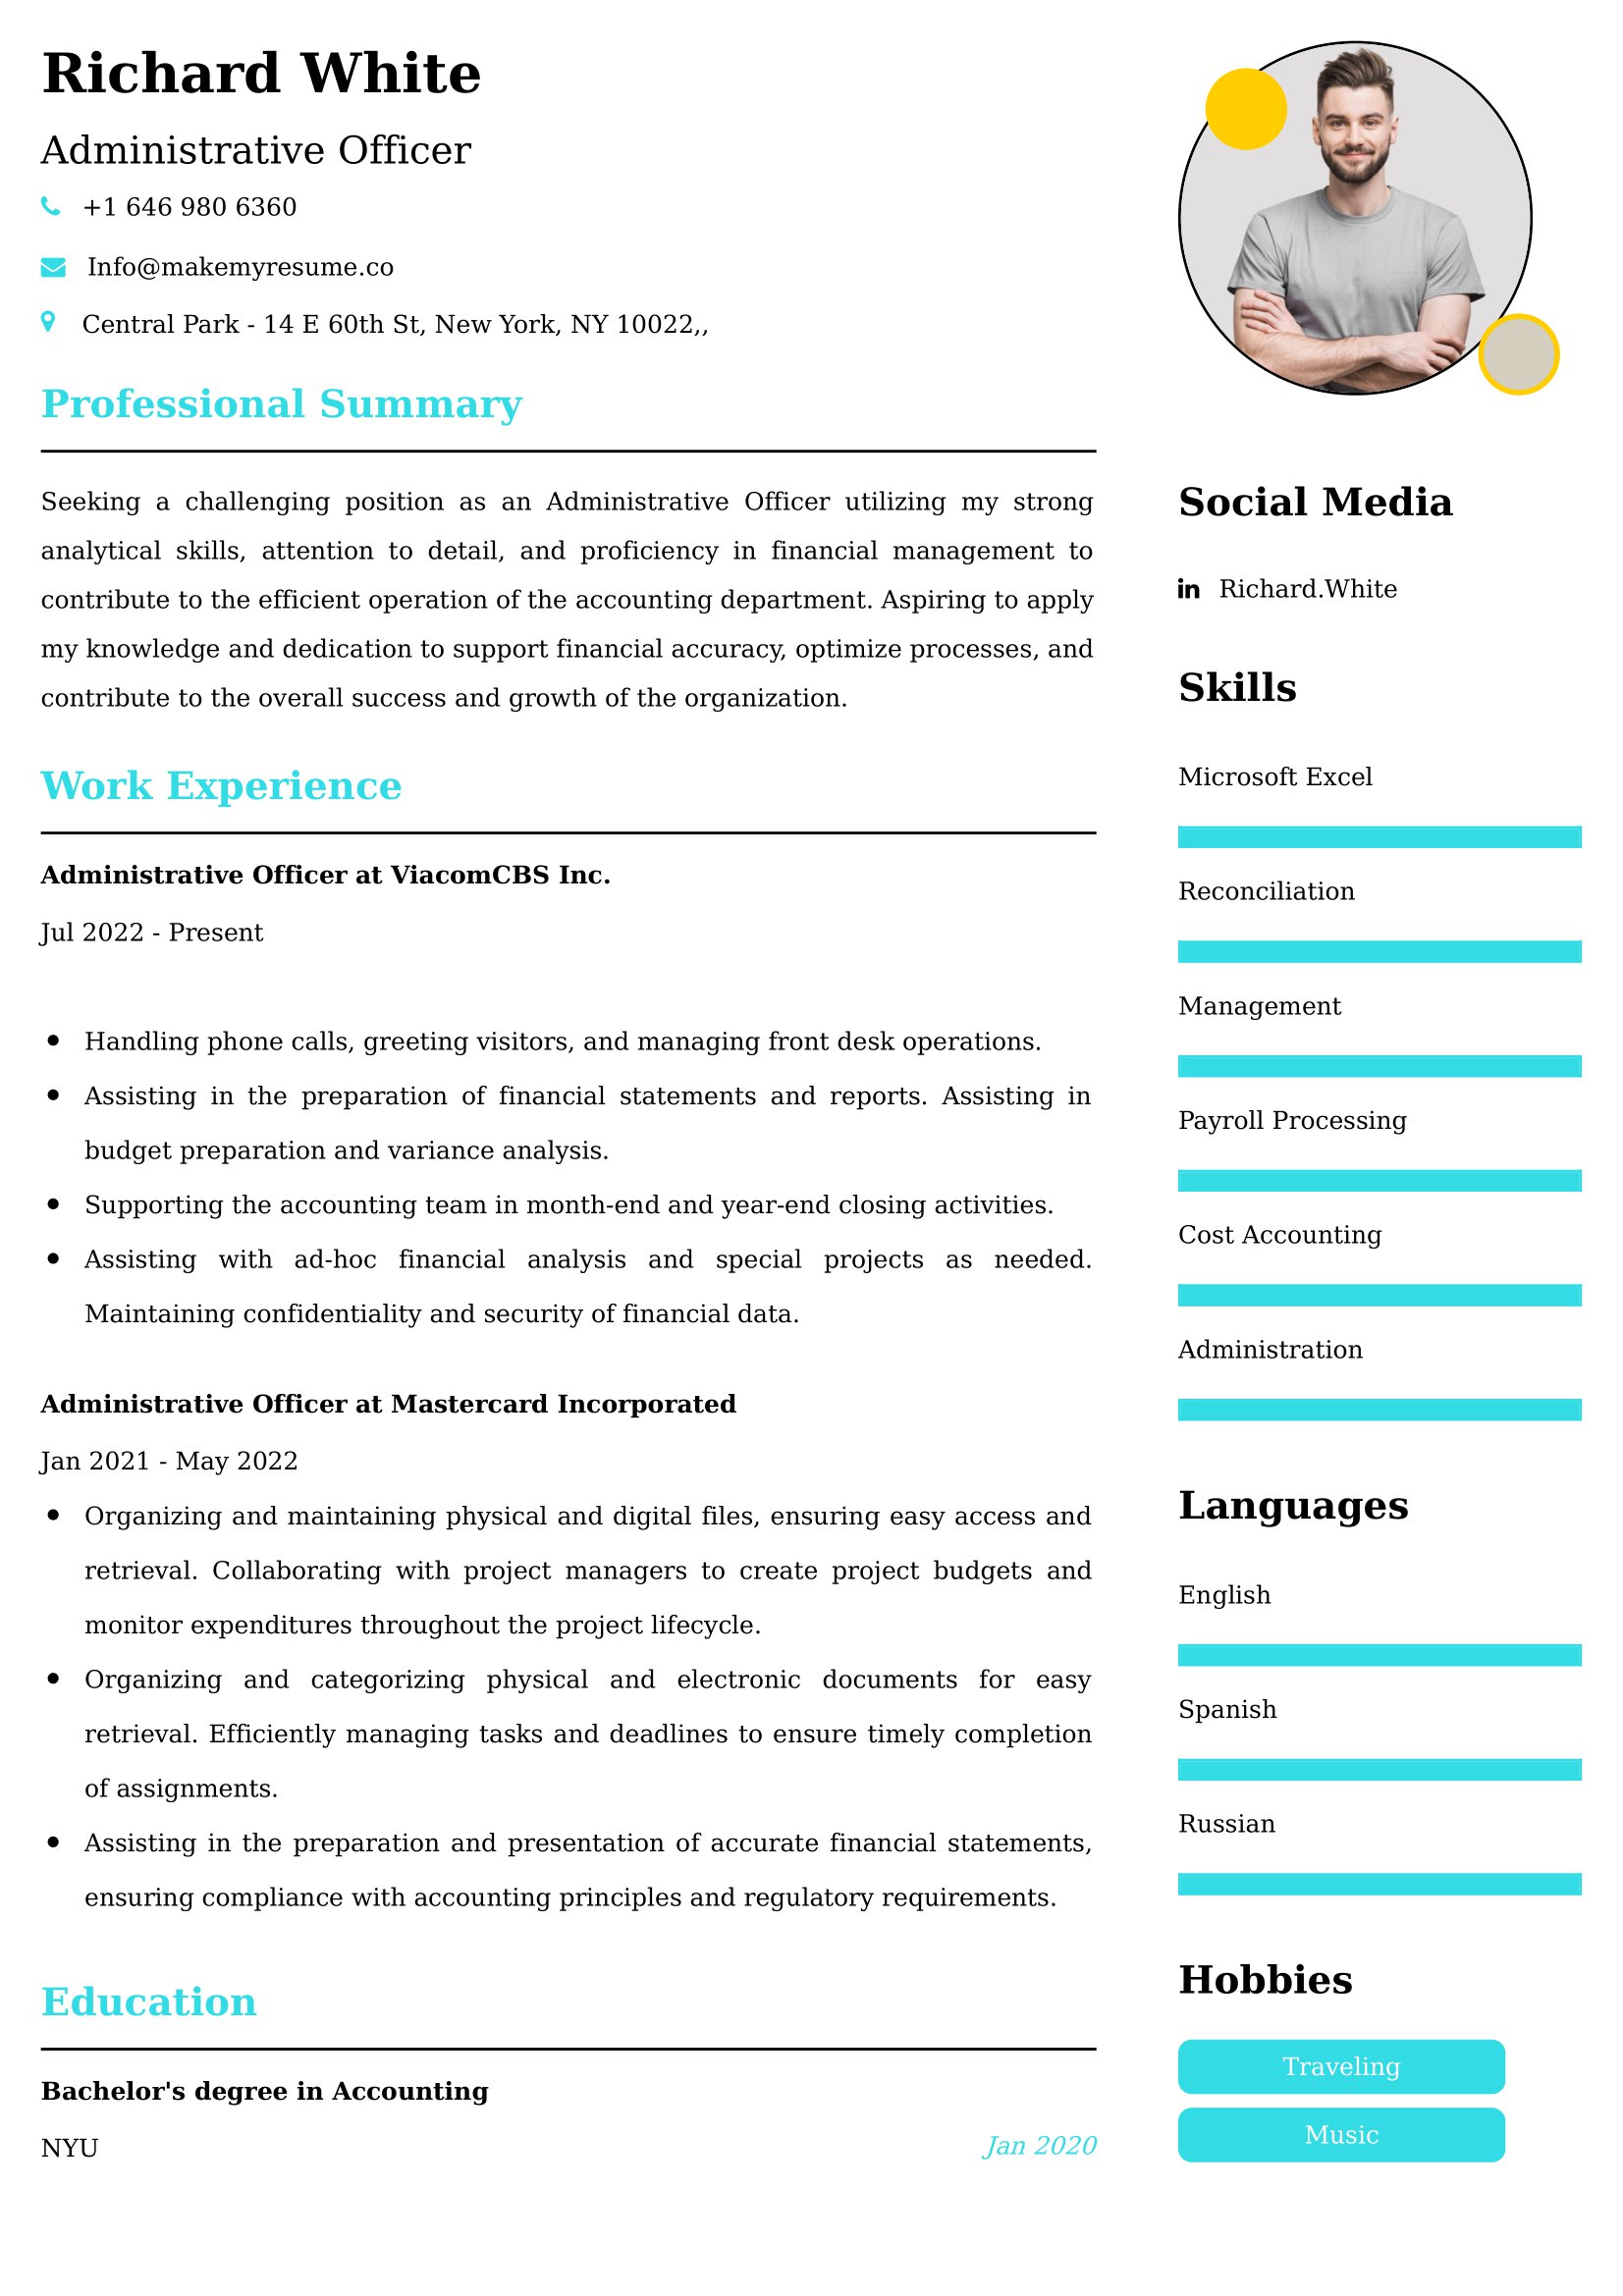 Administrative Officer Resume Examples for UK Jobs - Tips and Guide